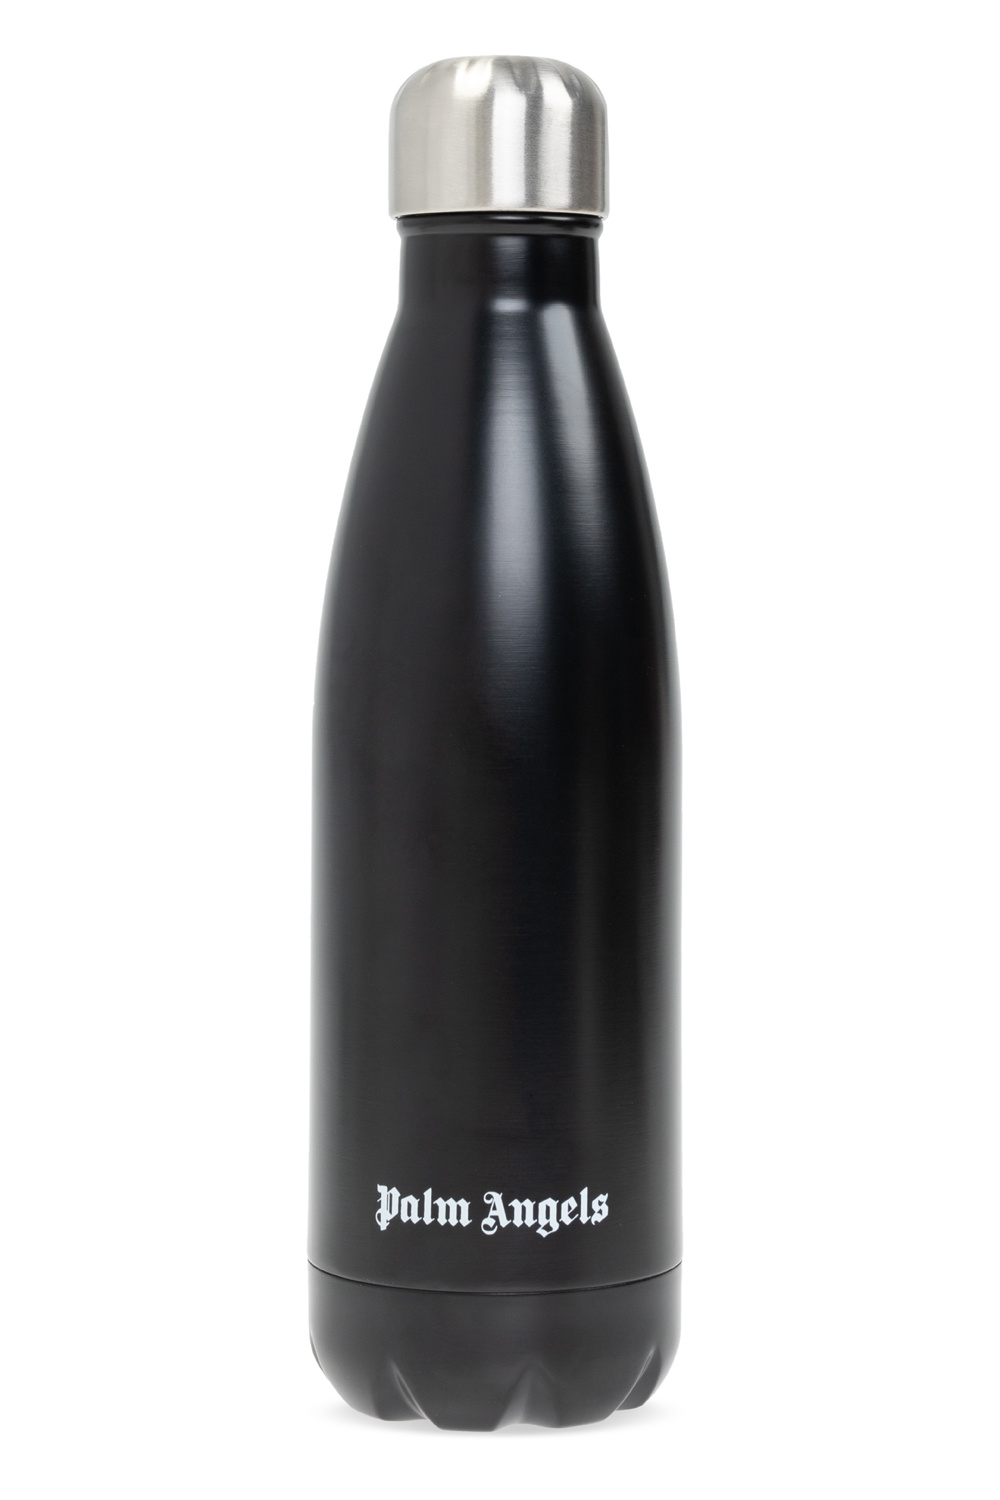 Palm Angels Thermal bottle